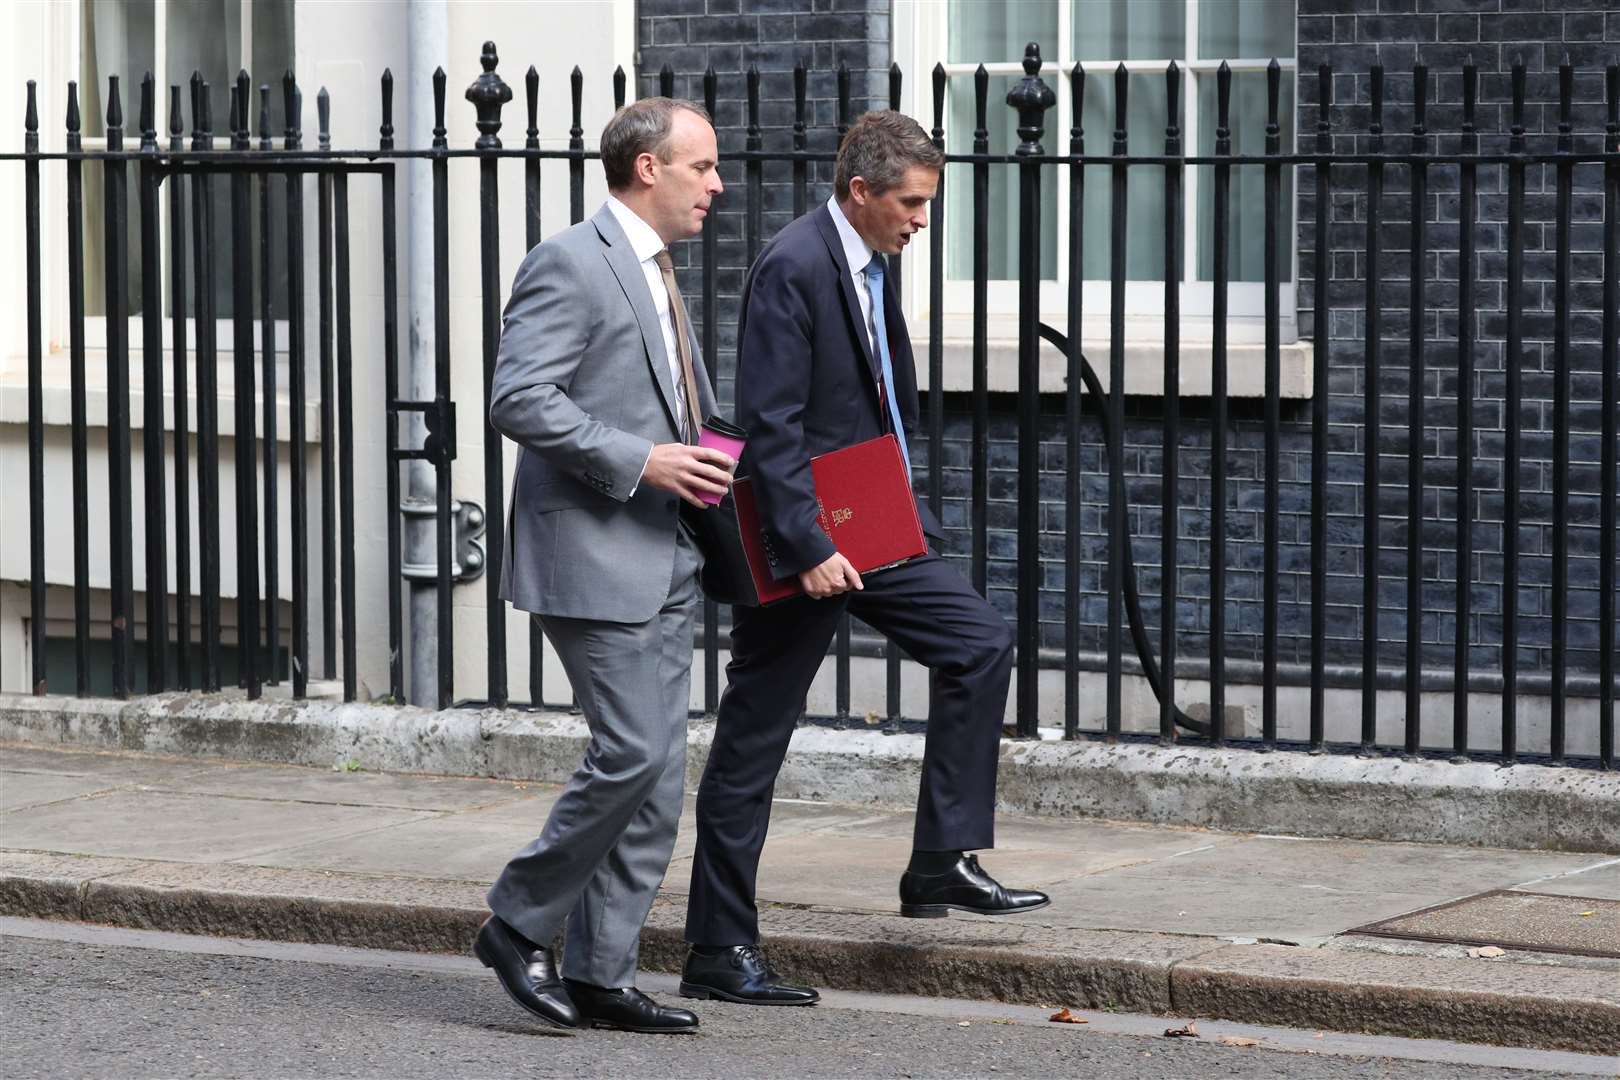 Foreign Secretary Dominic Raab (left) and Education Secretary Gavin Williamson could be targeted in the reshuflle